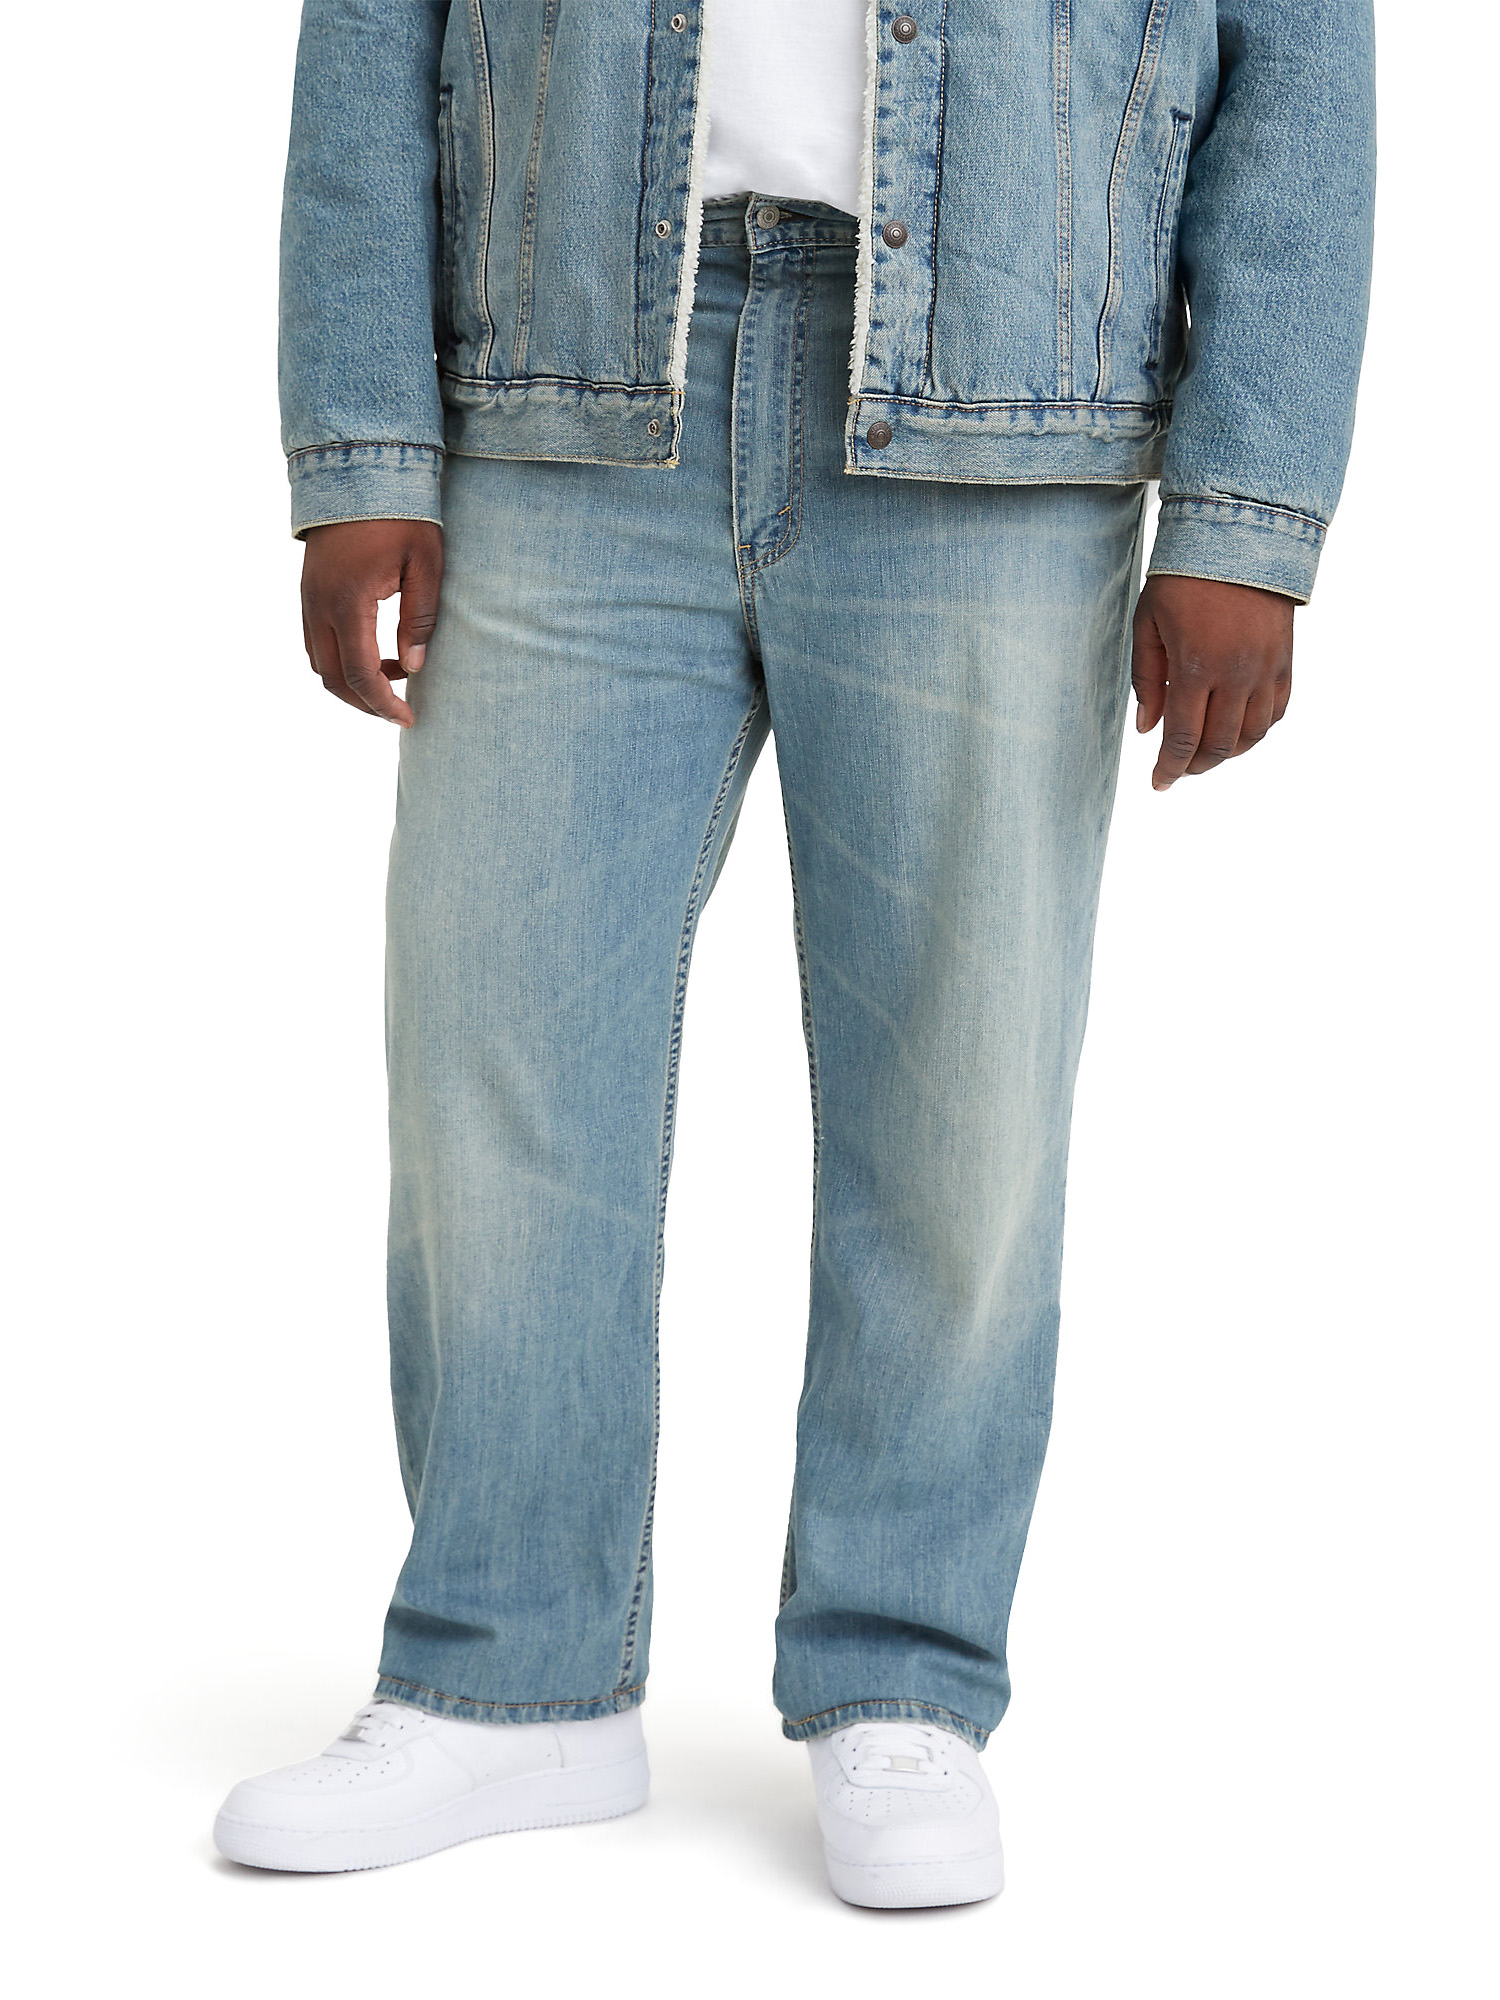 Levi's Men's Big & Tall 559 Relaxed Straight Jeans - image 1 of 5